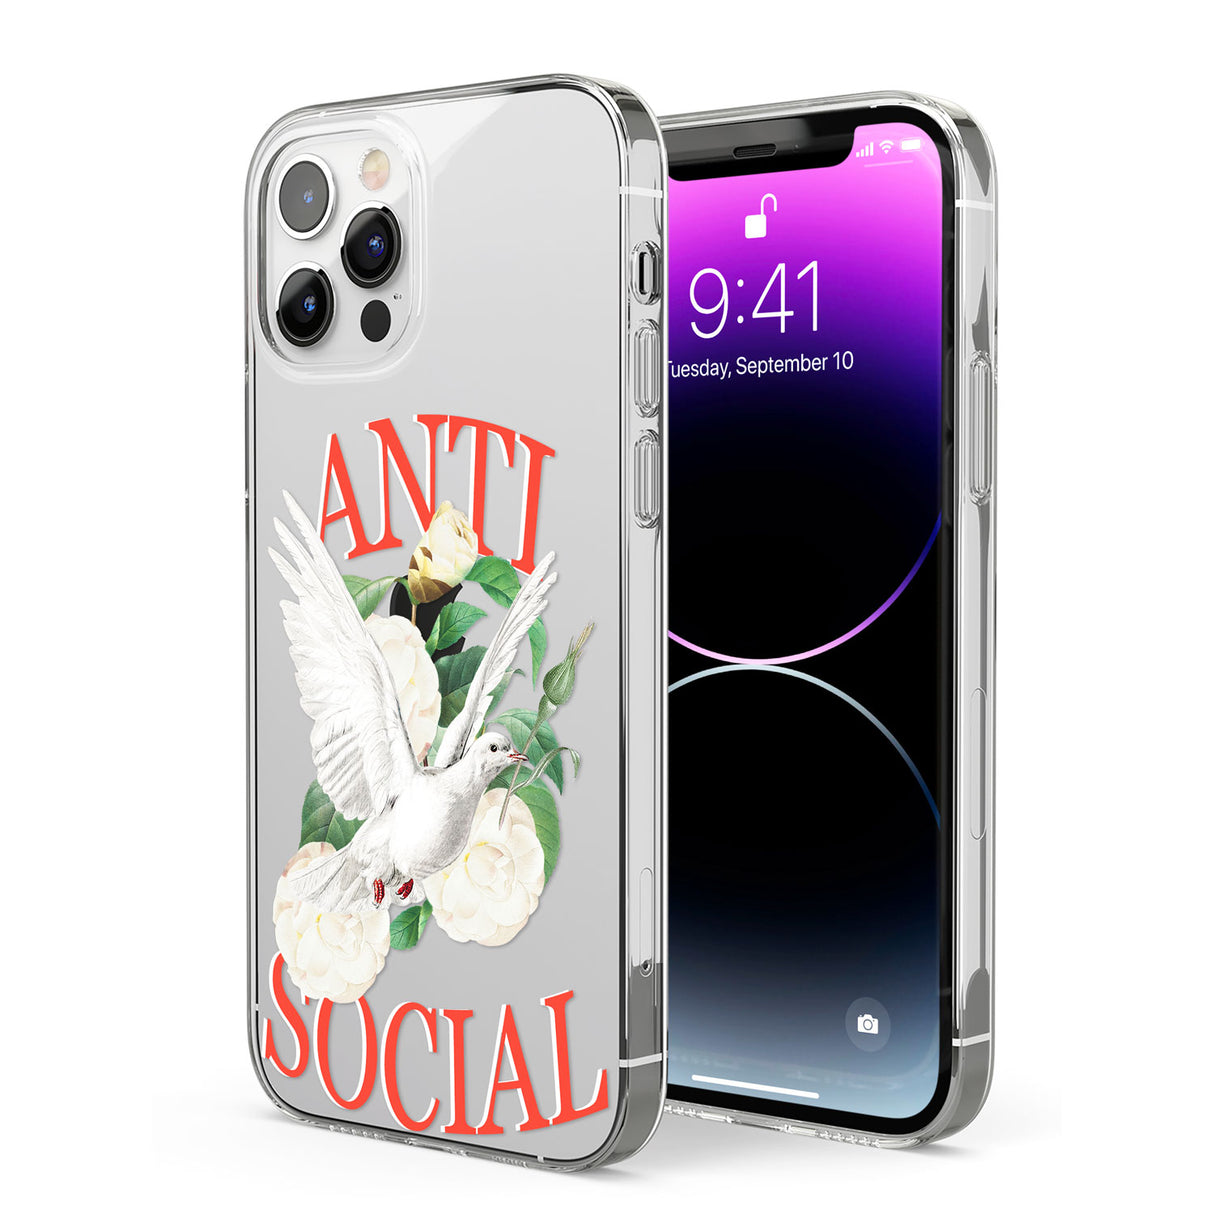 Anti-Social Phone Case for iPhone 12 Pro